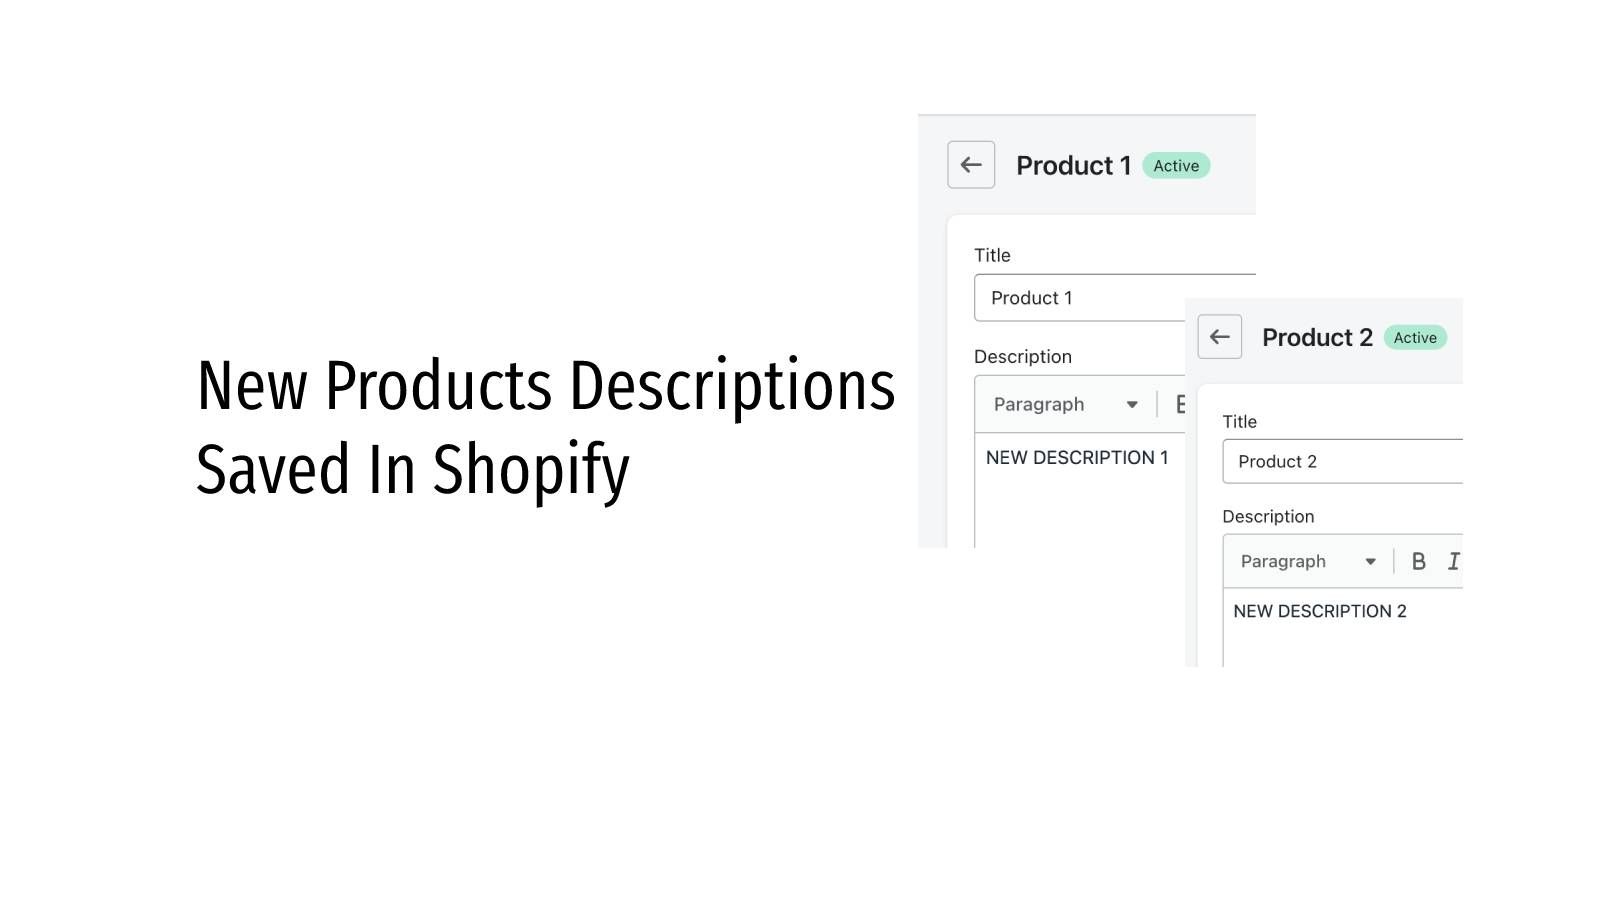 bulk edited product descriptions are saved to Shopify!